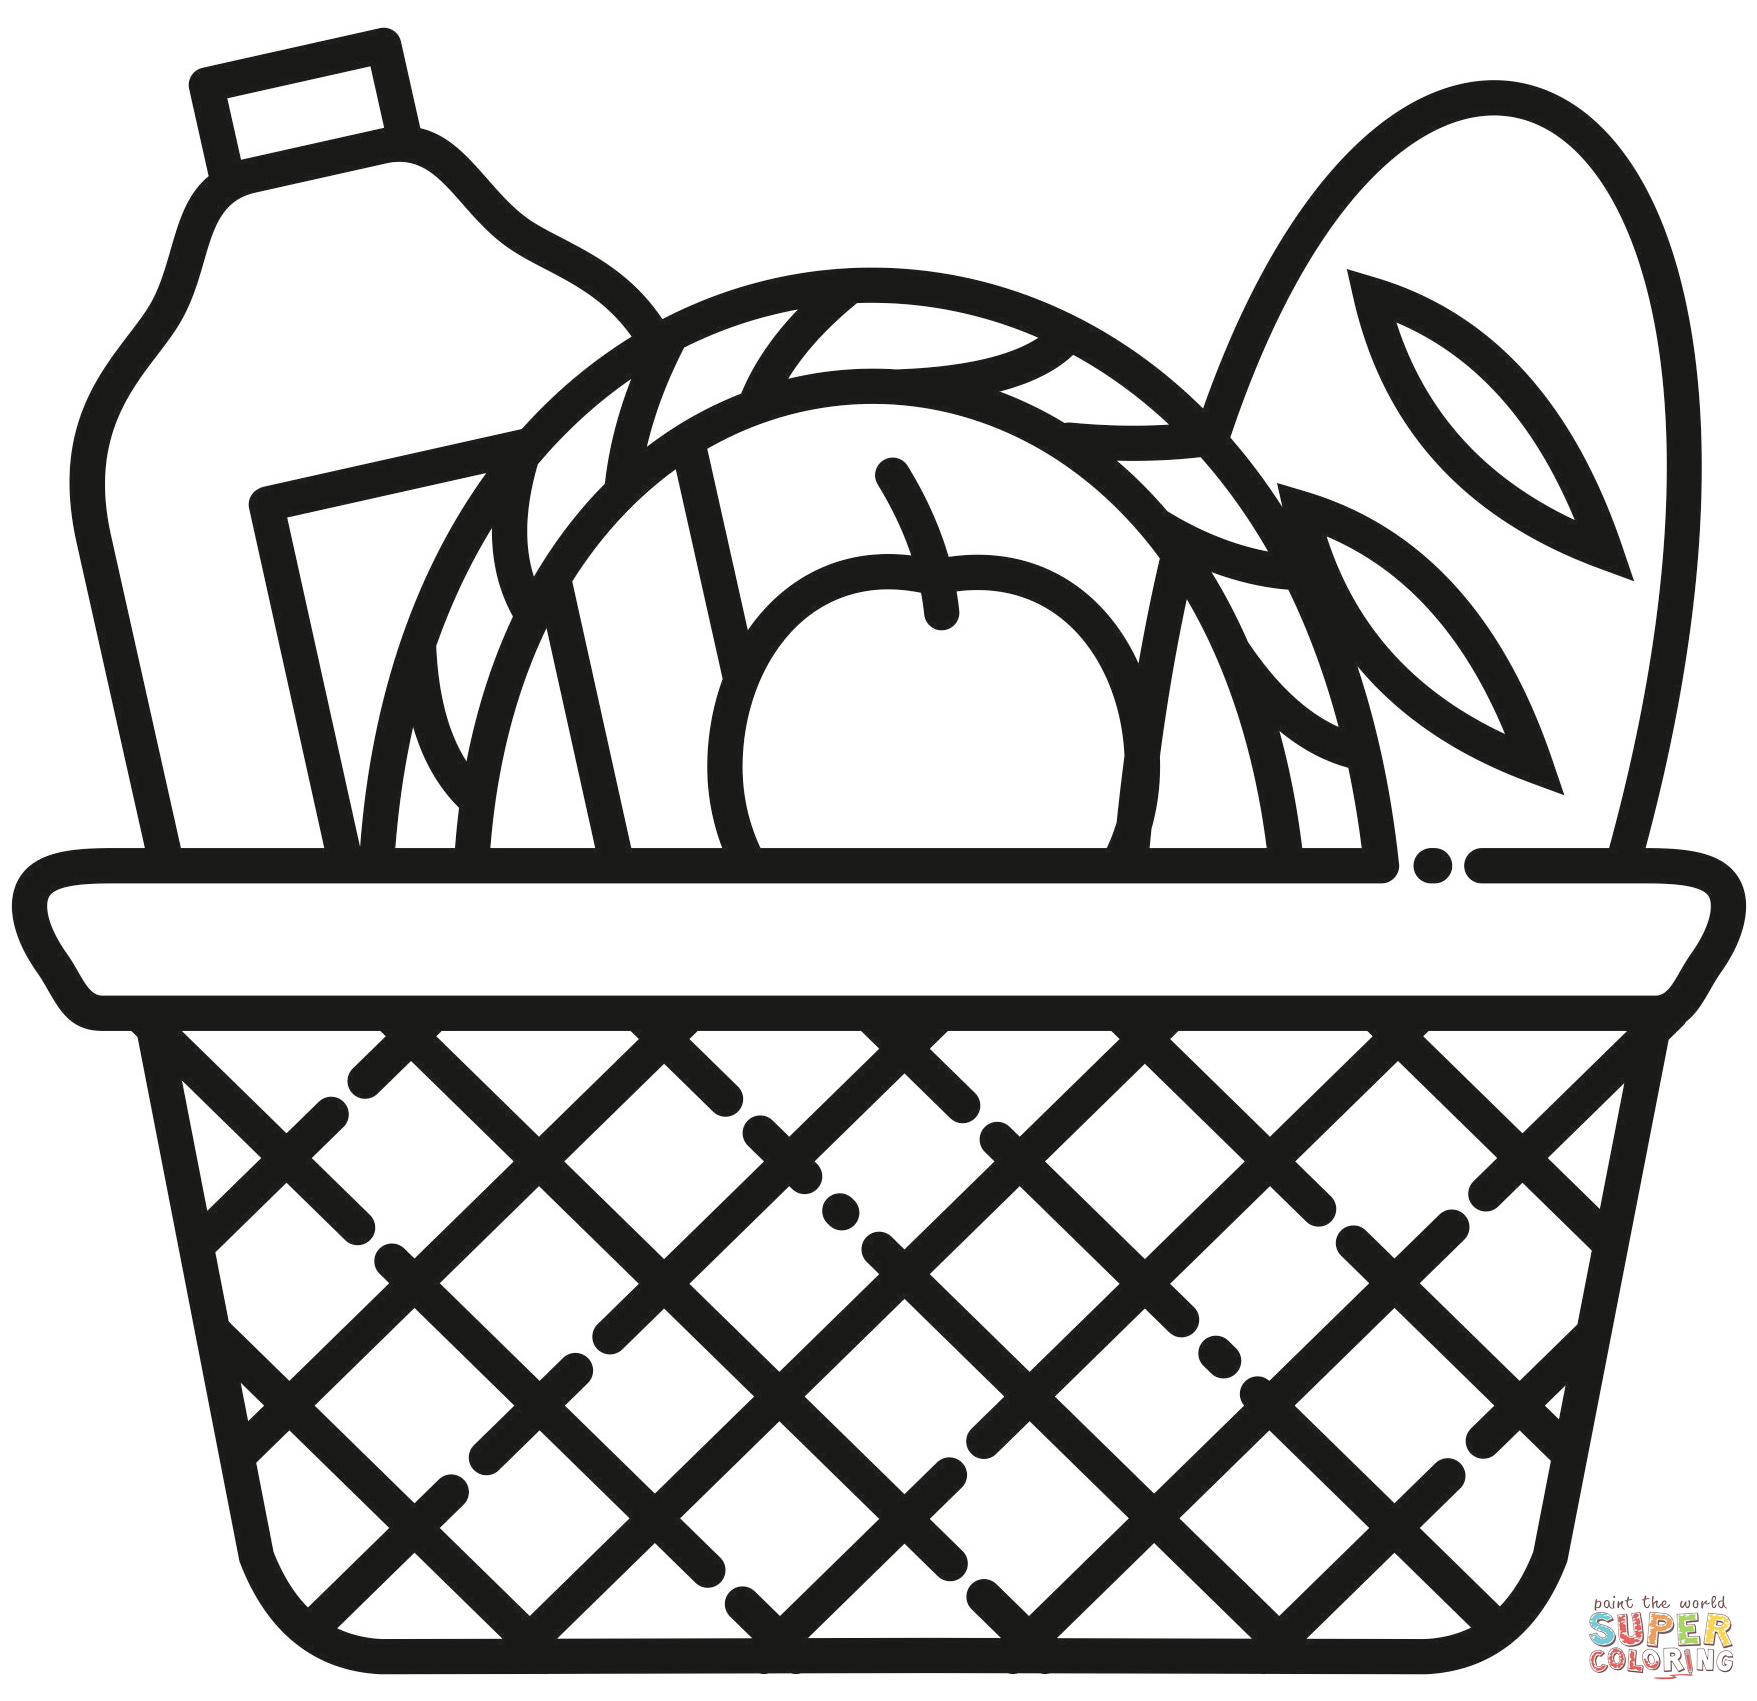 Picnic basket coloring page free printable coloring pages